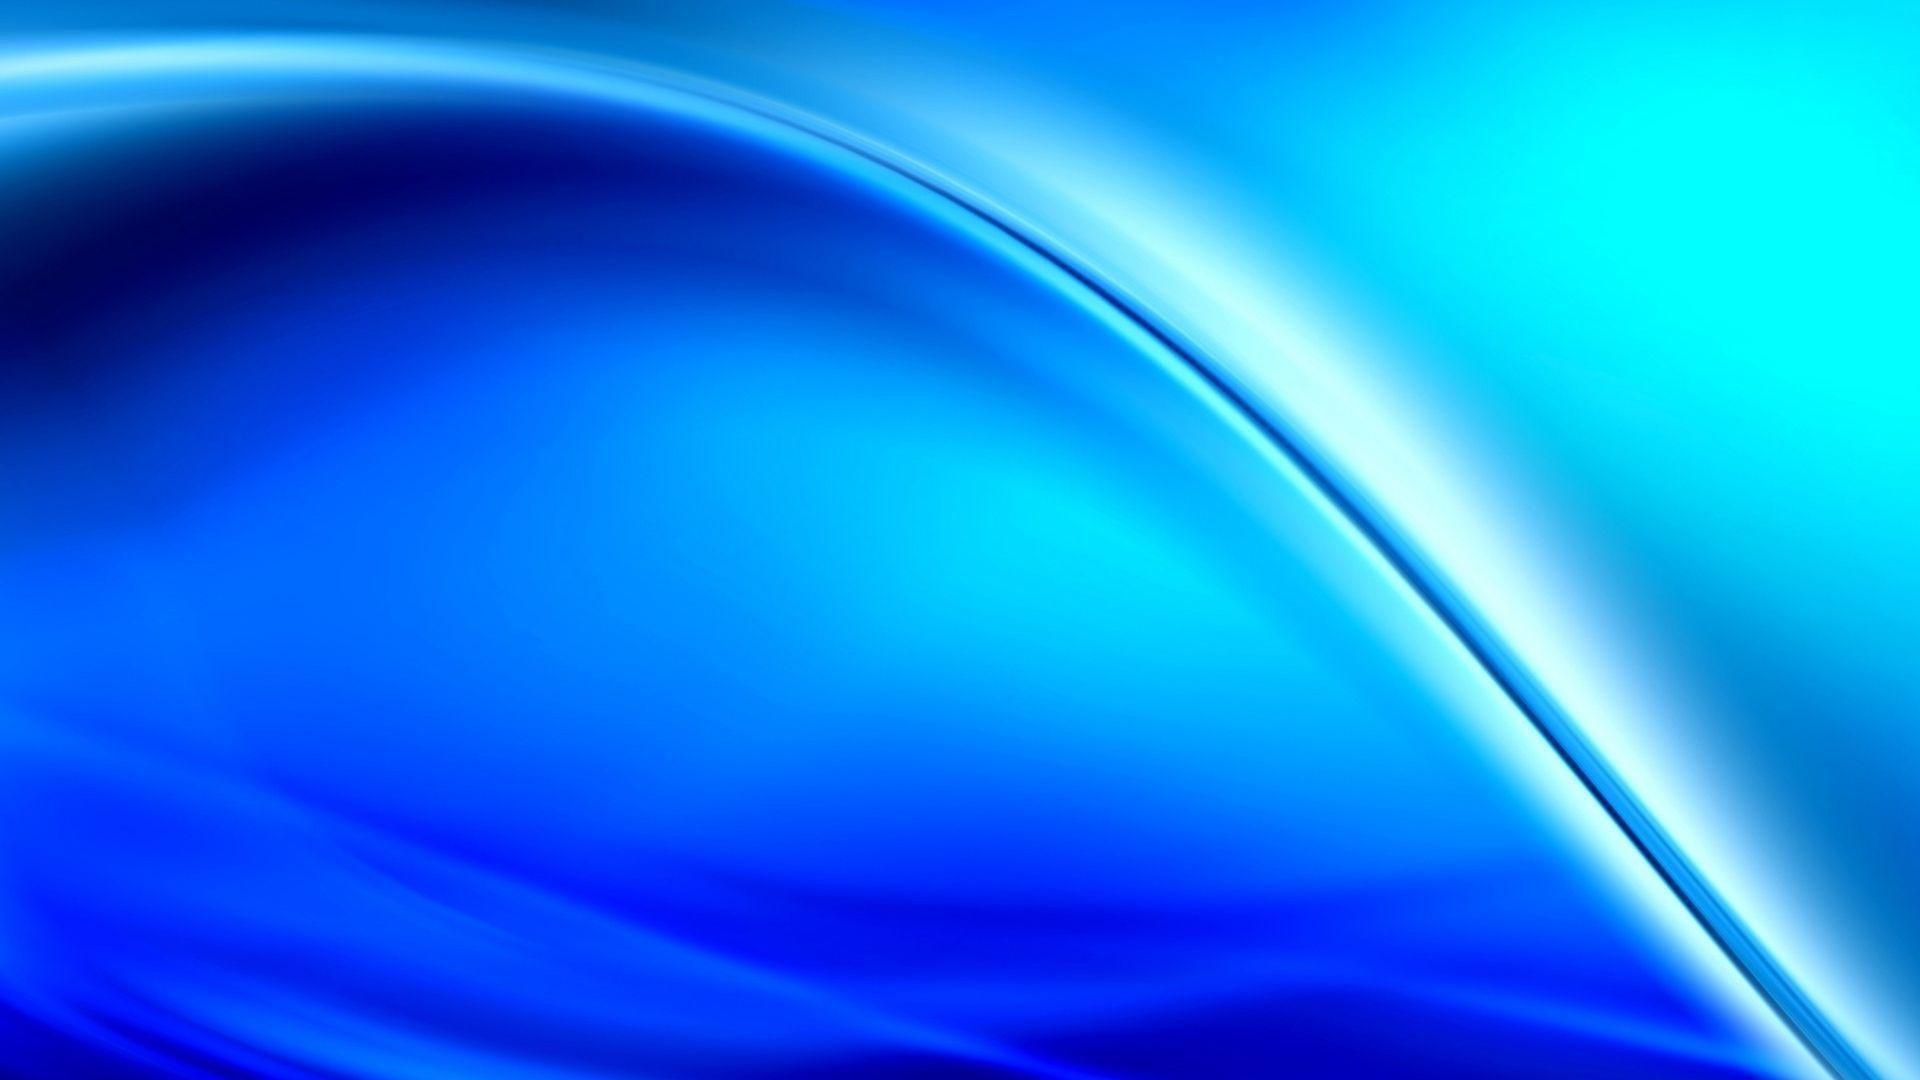 Banner Background Hd Image - IMAGESEE